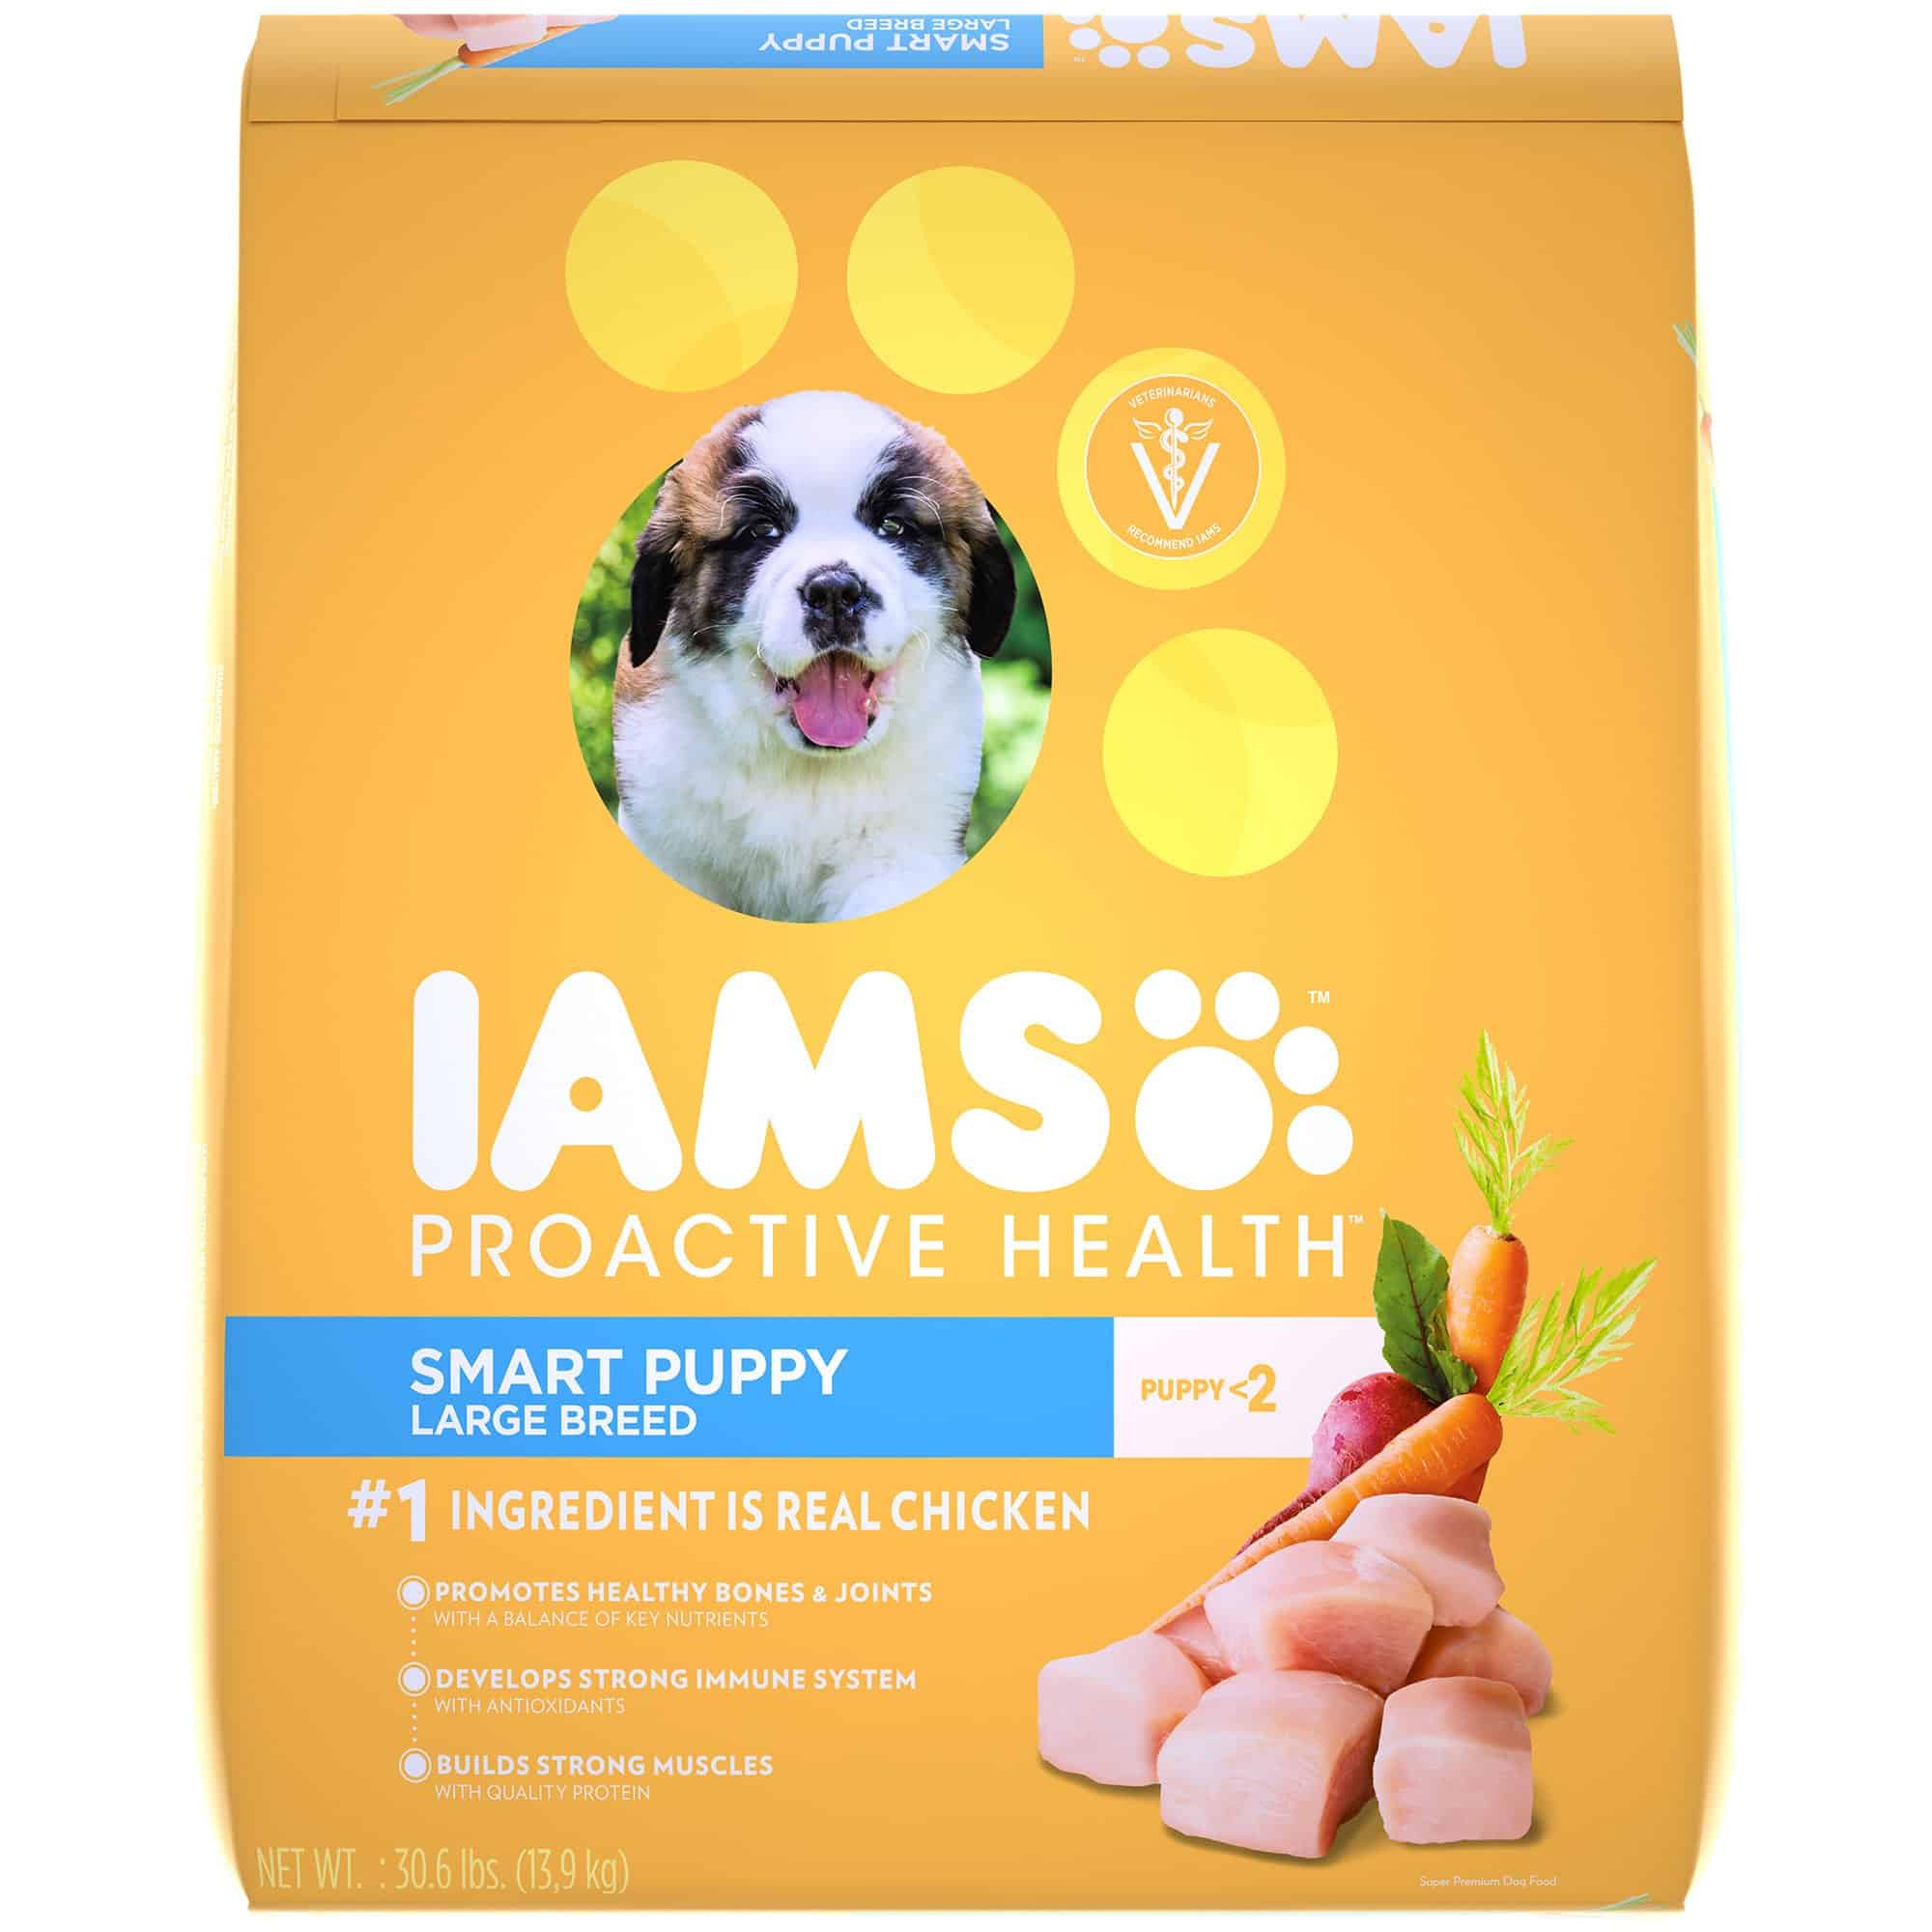 Iams ProActive Health Smart Puppy Large Breed Puppy Food